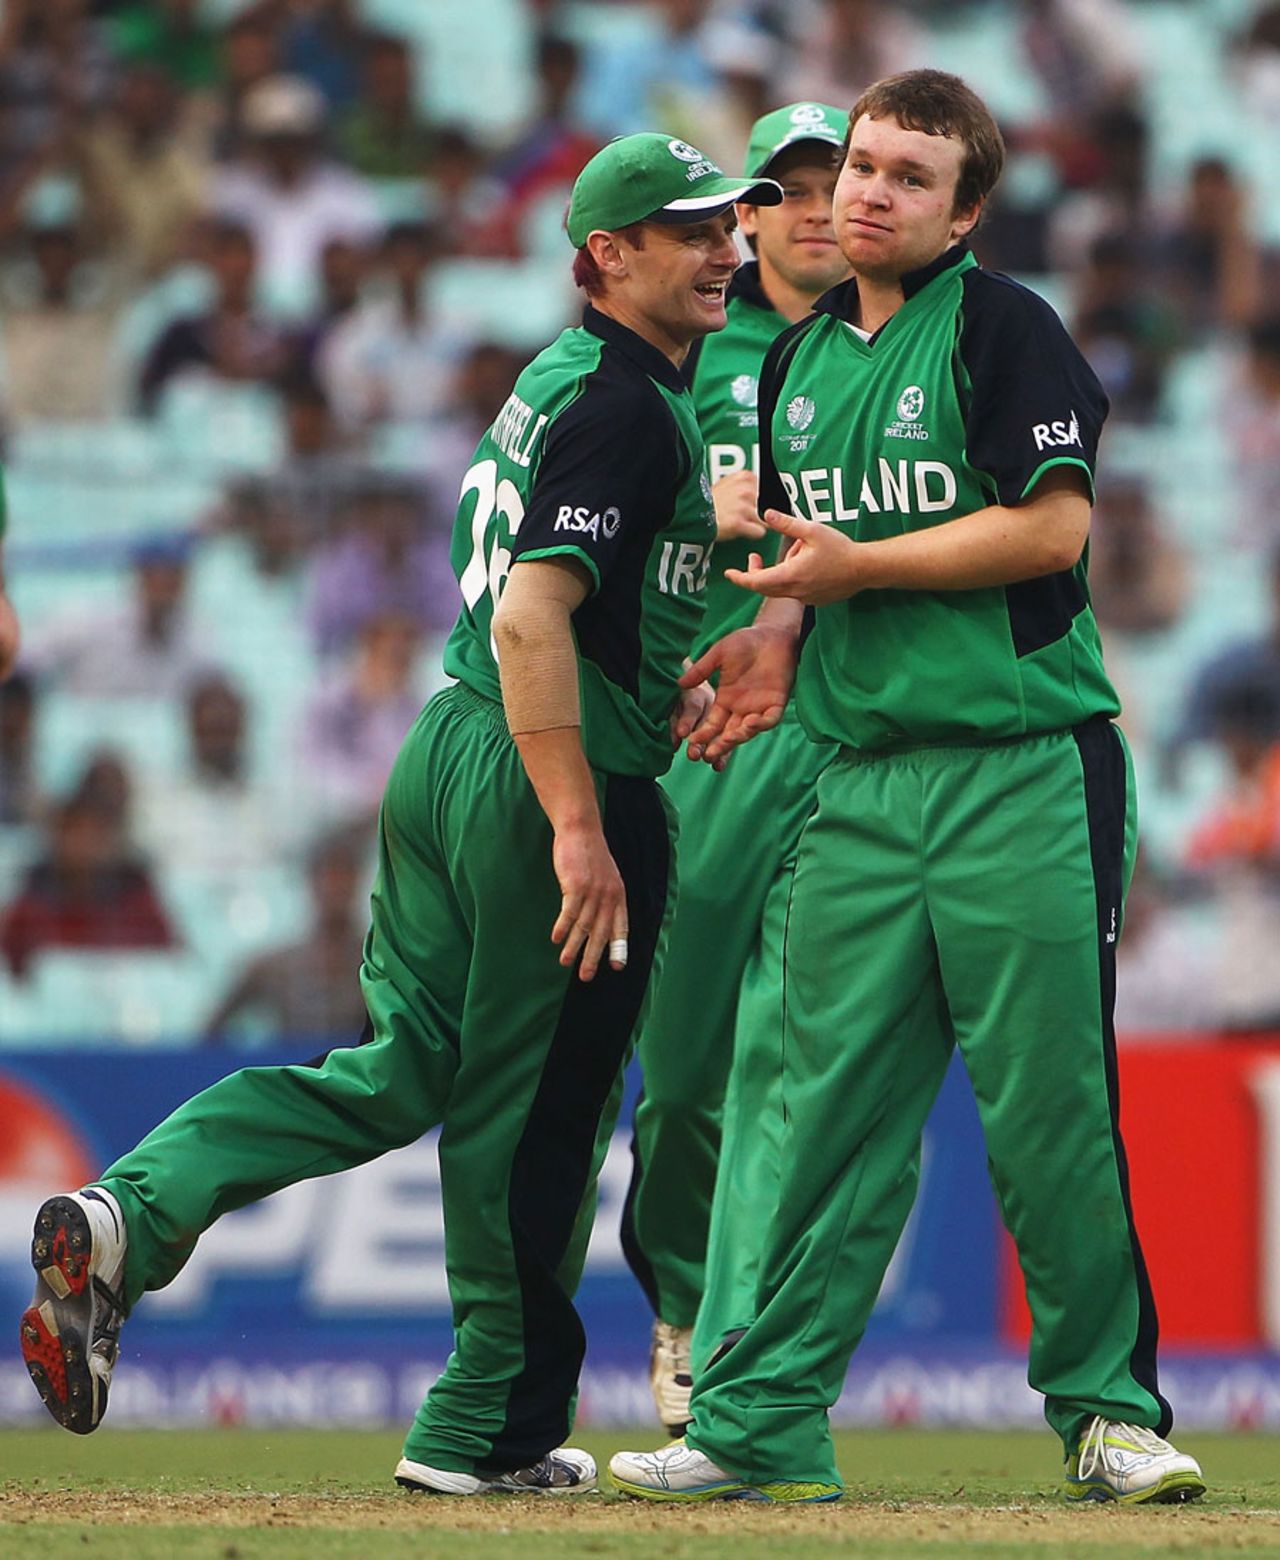 Team-mates congratulate Paul Stirling on dismissing Faf du Plessis, Ireland v South Africa, Group B, World Cup, Kolkata, March 15, 2011